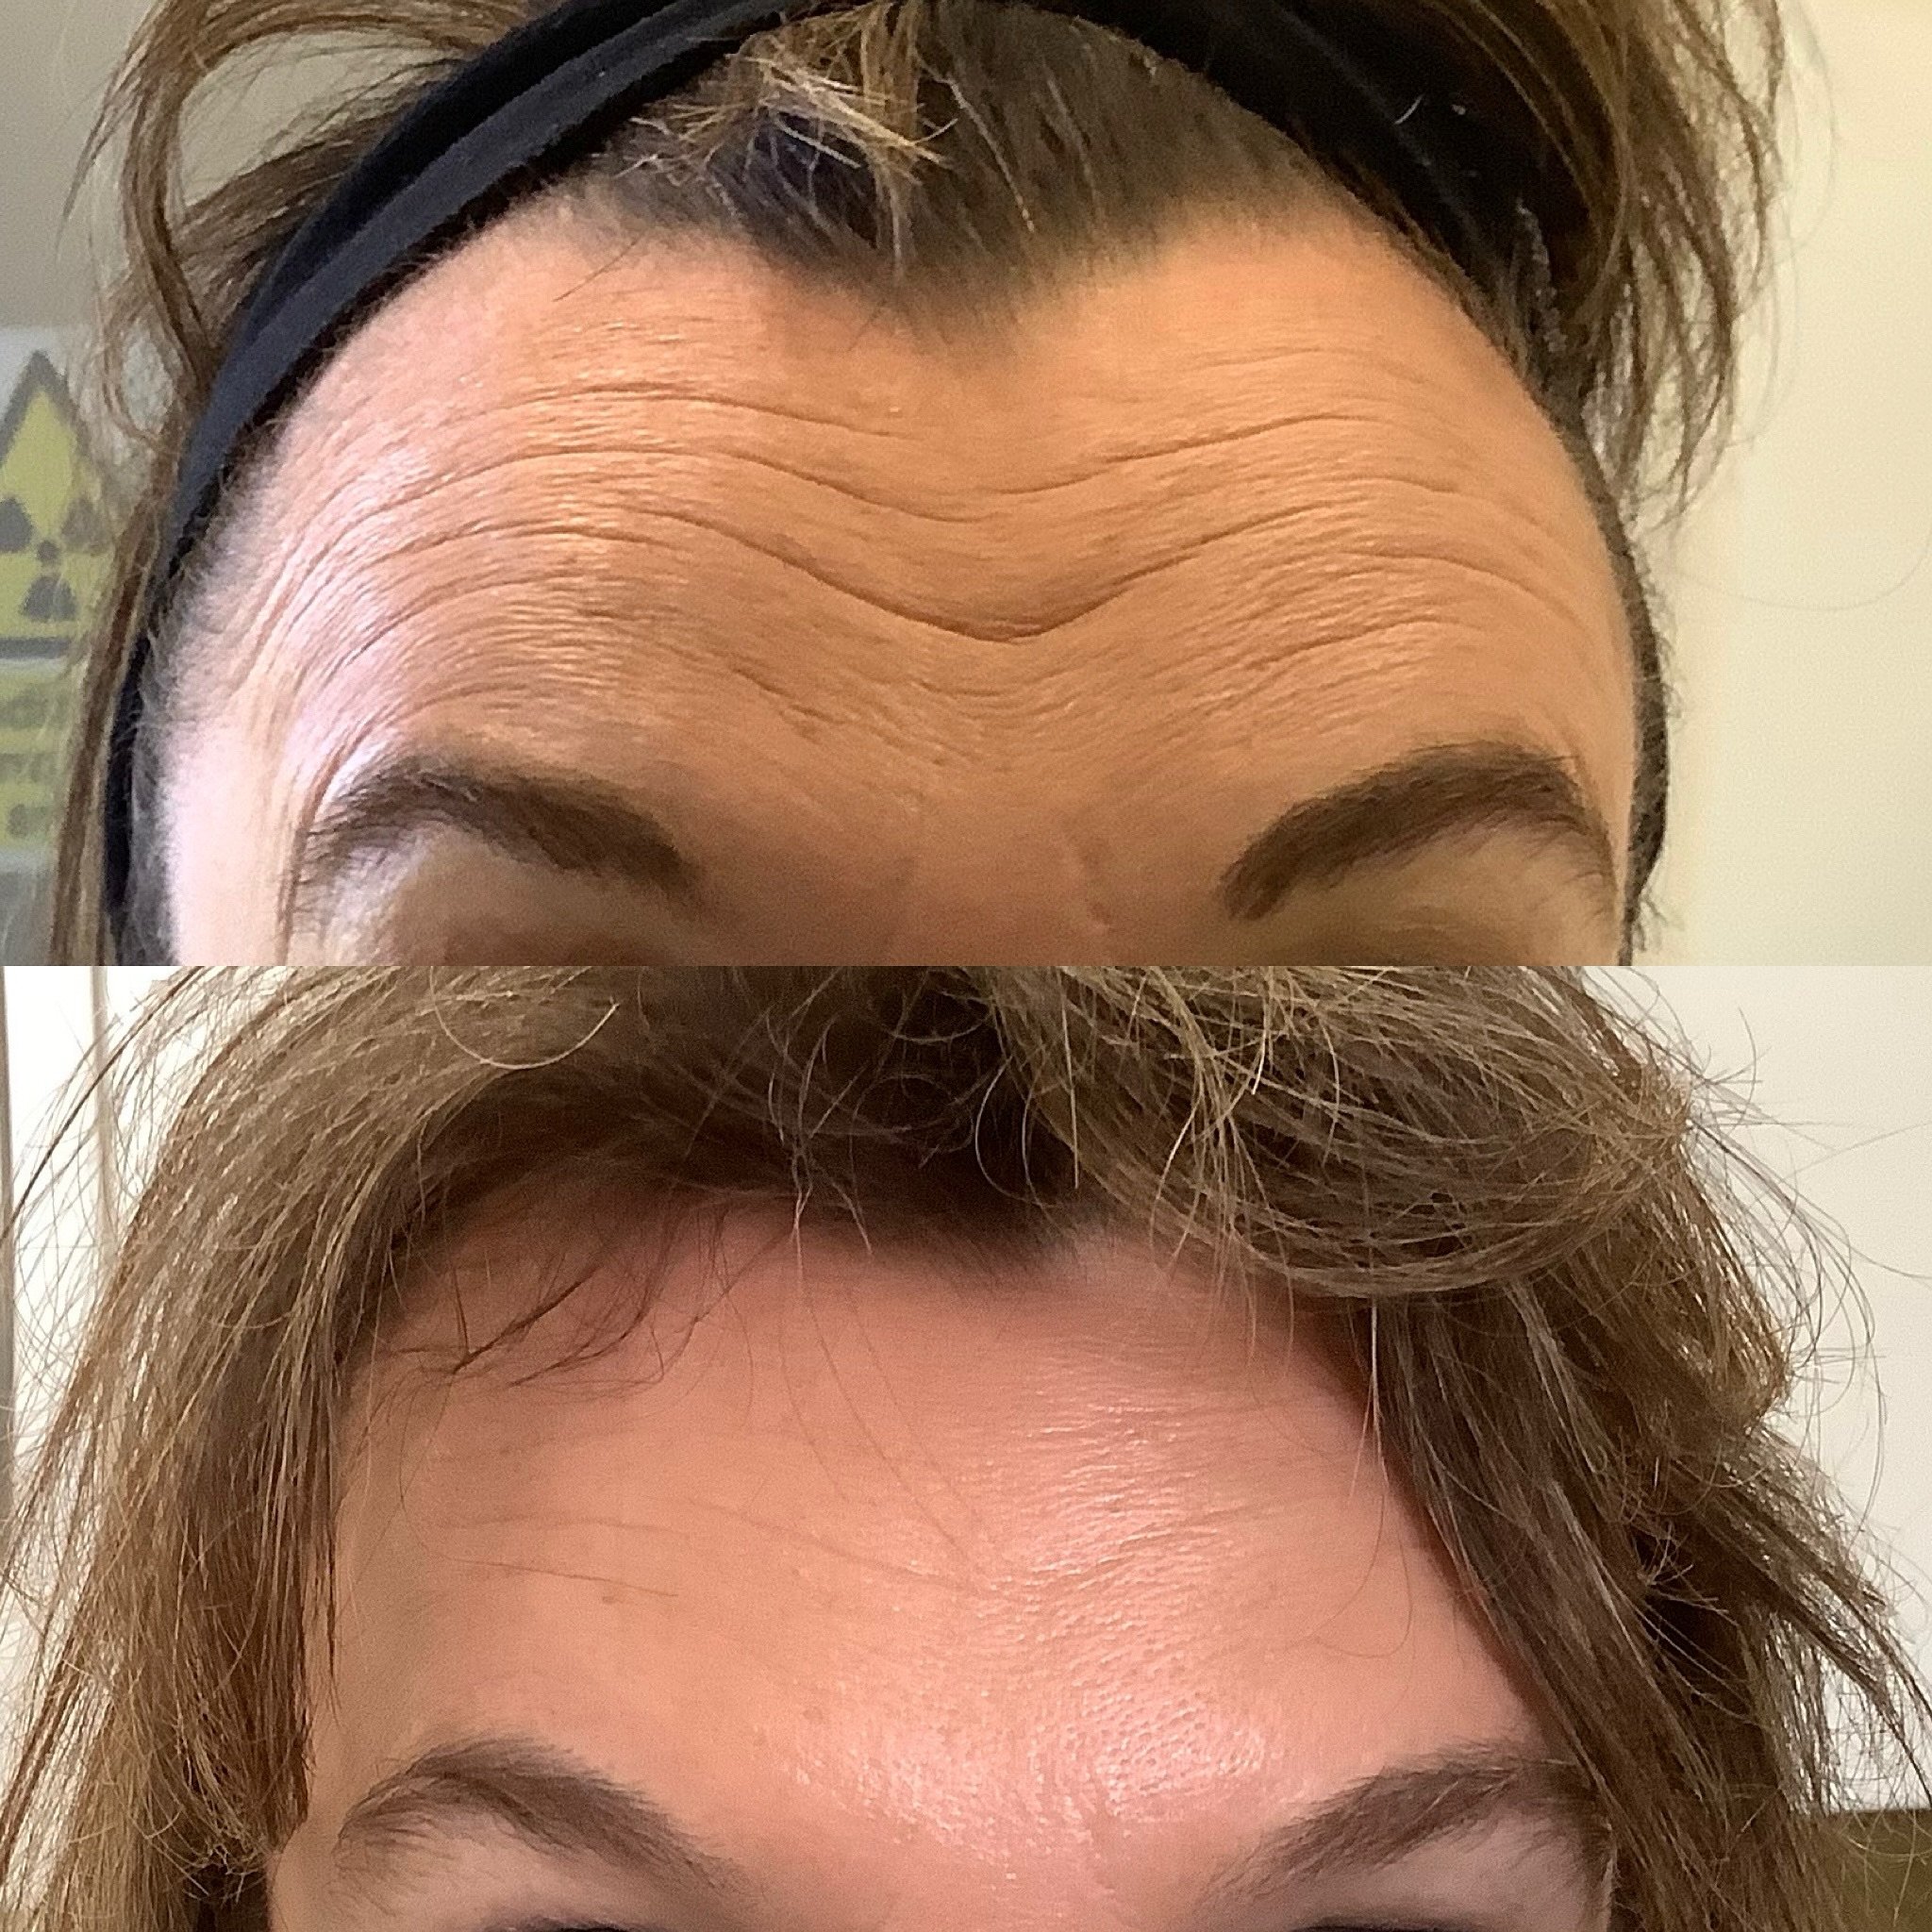 An example of how good Botox maintains movement whilst reducing lines! 

Top: Before Botox, shows lines when prompted to raise eyebrows
Below: 3 weeks after Botox administration, shows much reduced lines even when raising eyebrows highlighting natura